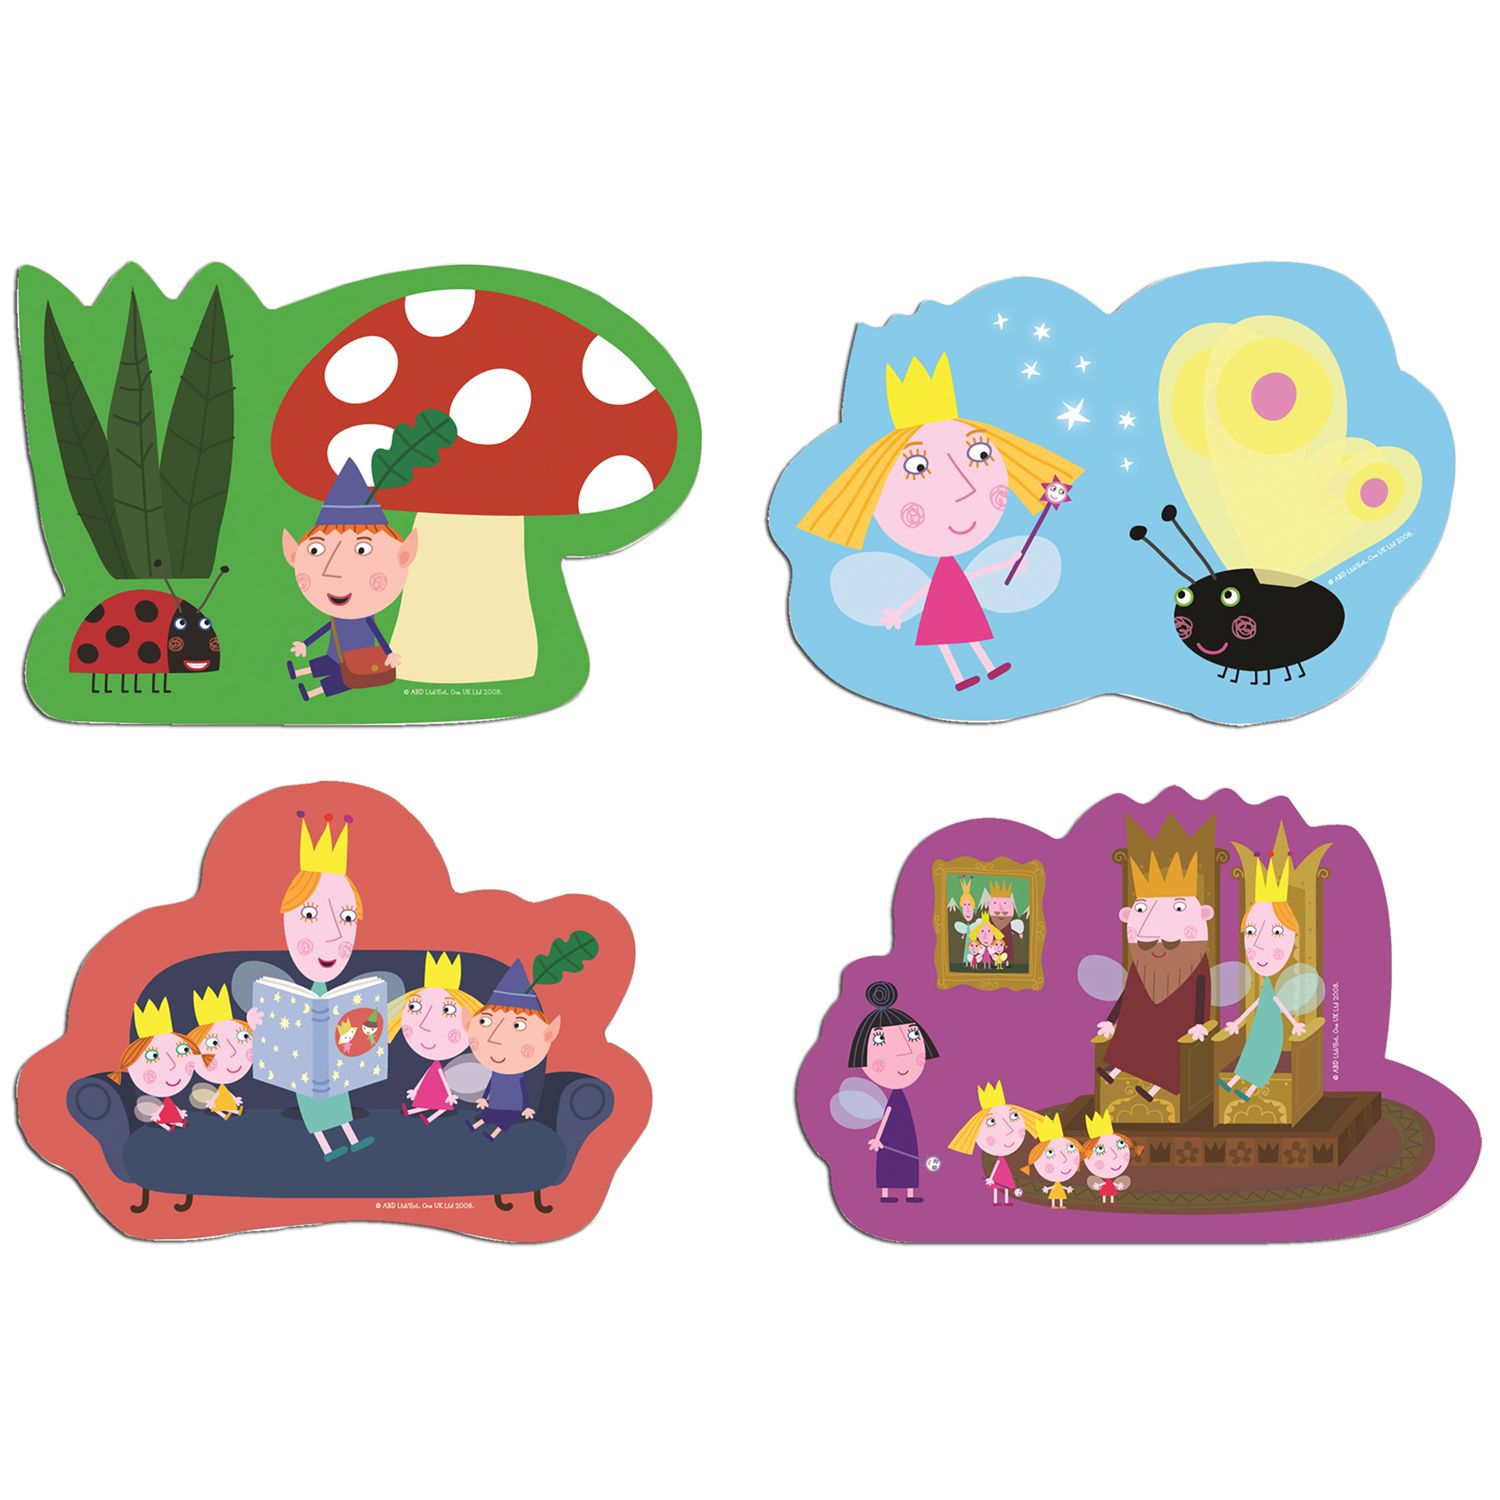 Ben Holly S Little Kingdom 4 Shaped Puzzles At John Lewis Partners